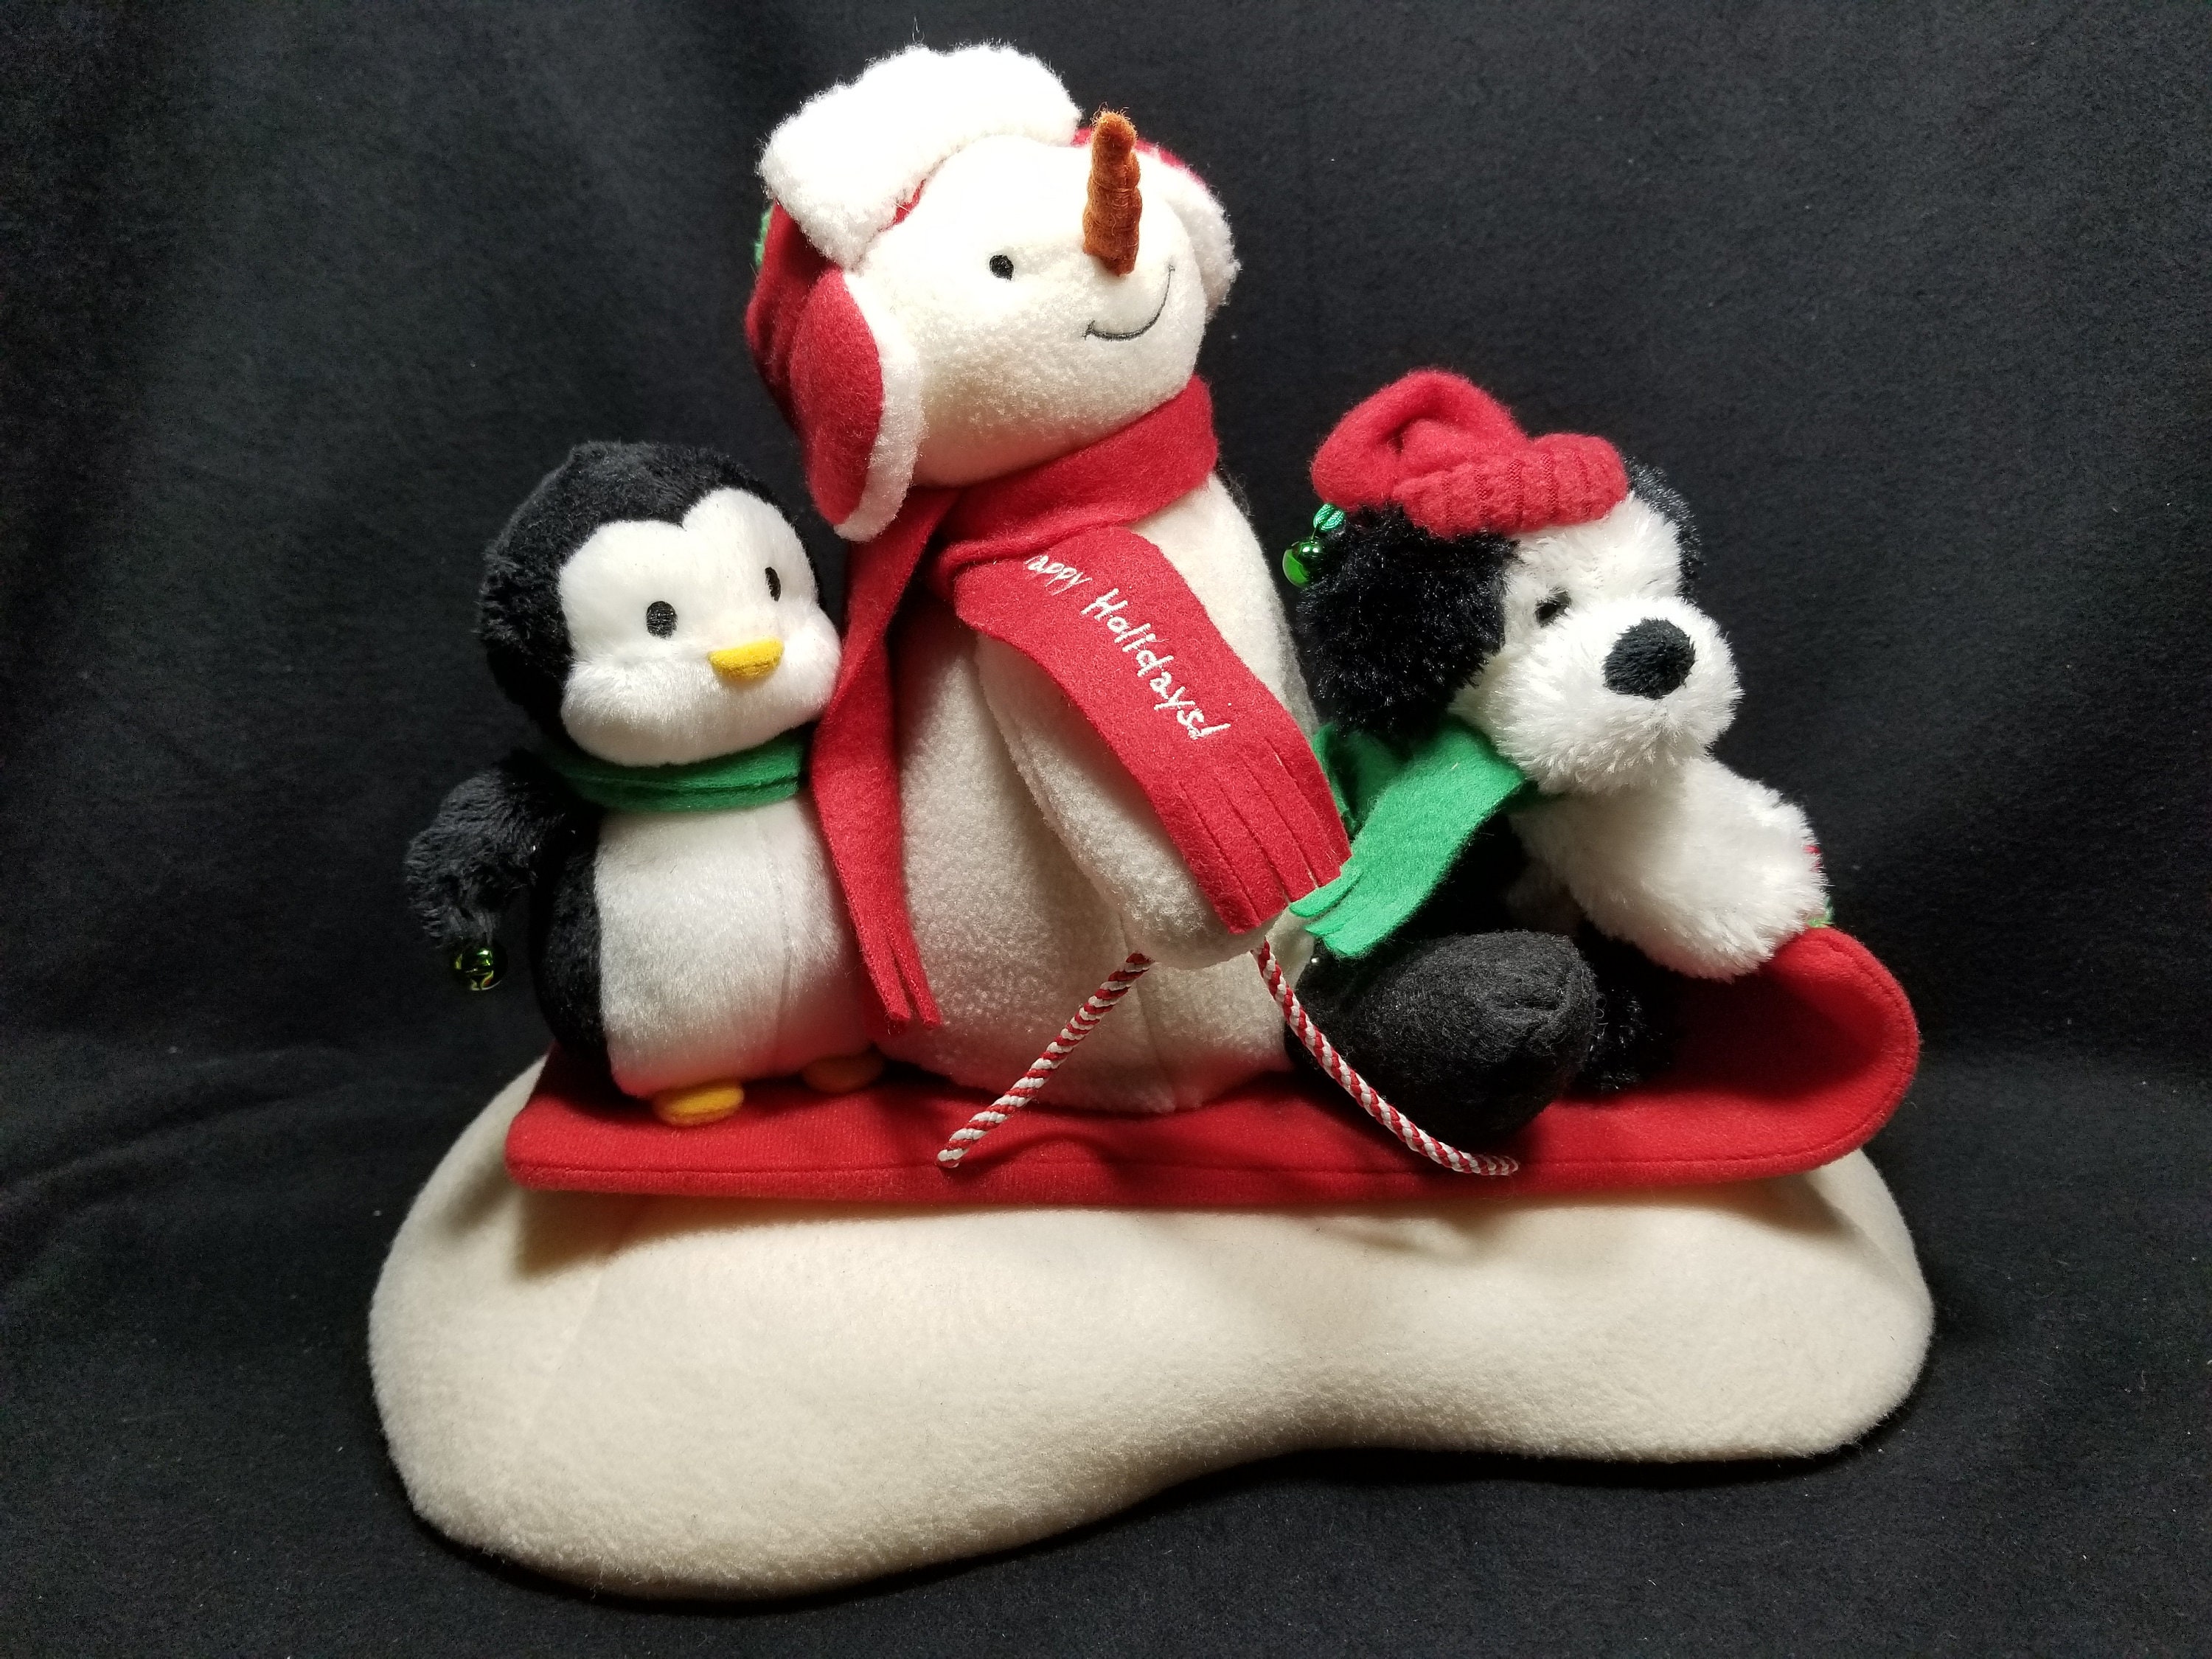 Hallmark Singing Snowman for sale Only 2 left at 70